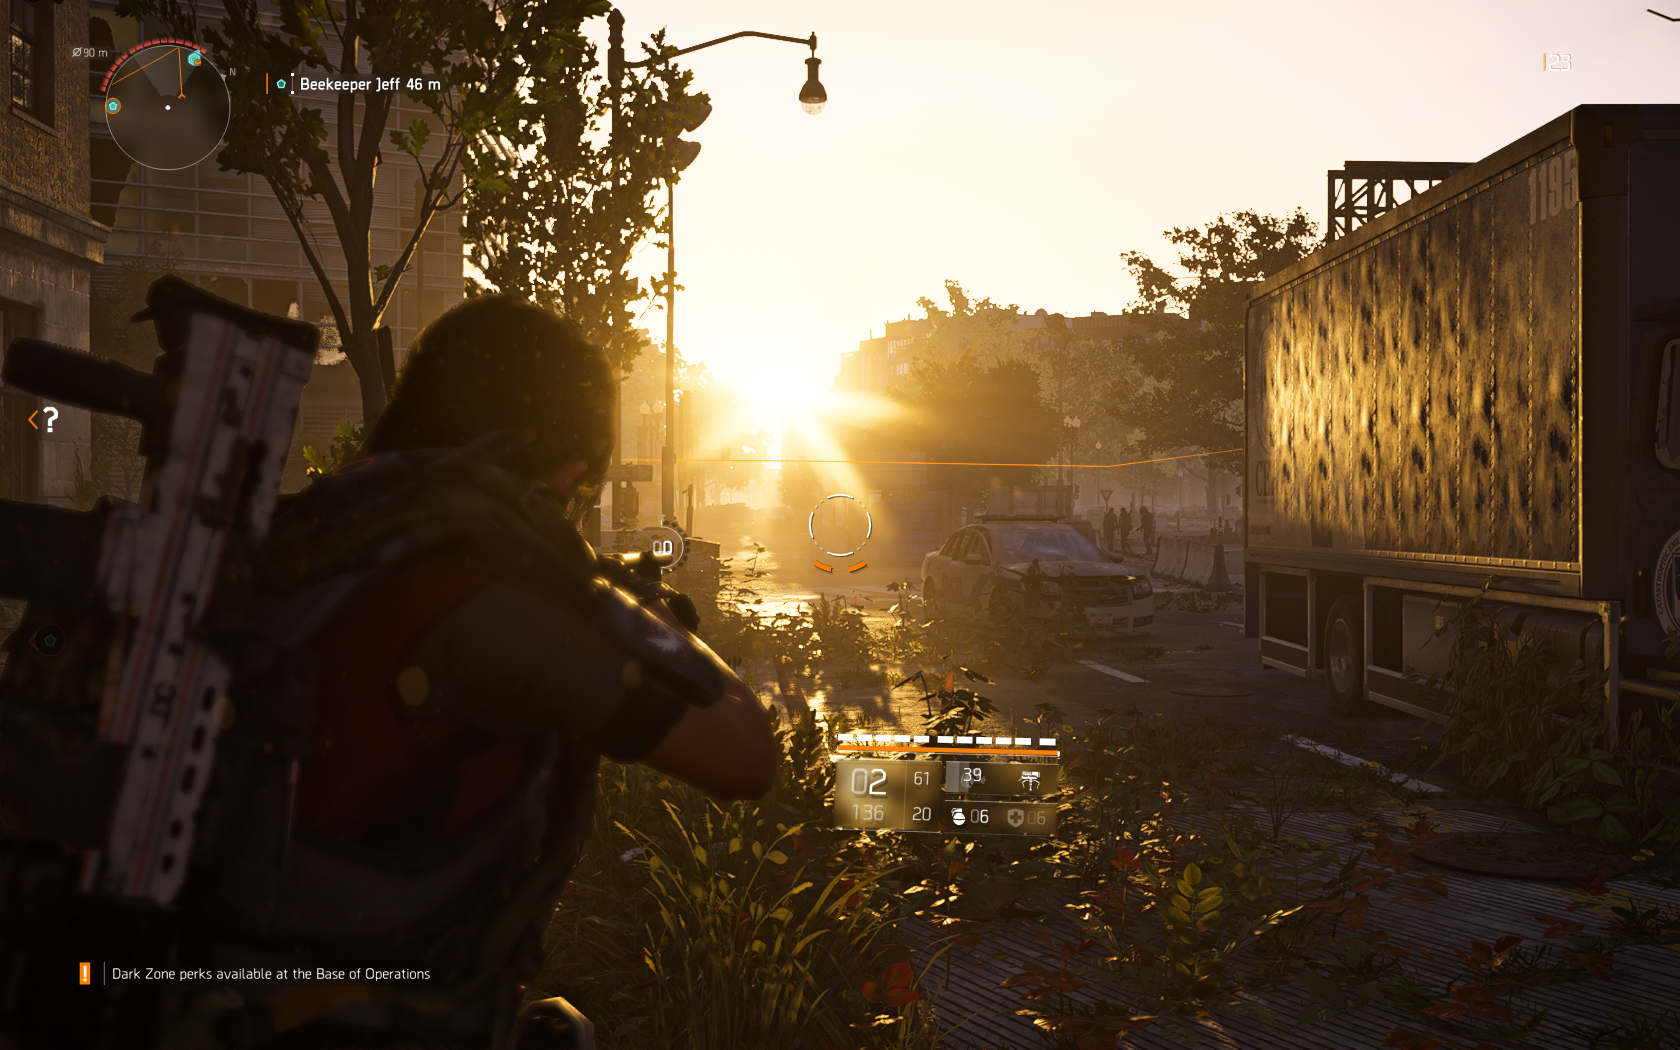 Tom Clancy's The Division 2 Screenshot 2019.03.19 - 10.40.18.25 - Copy.png